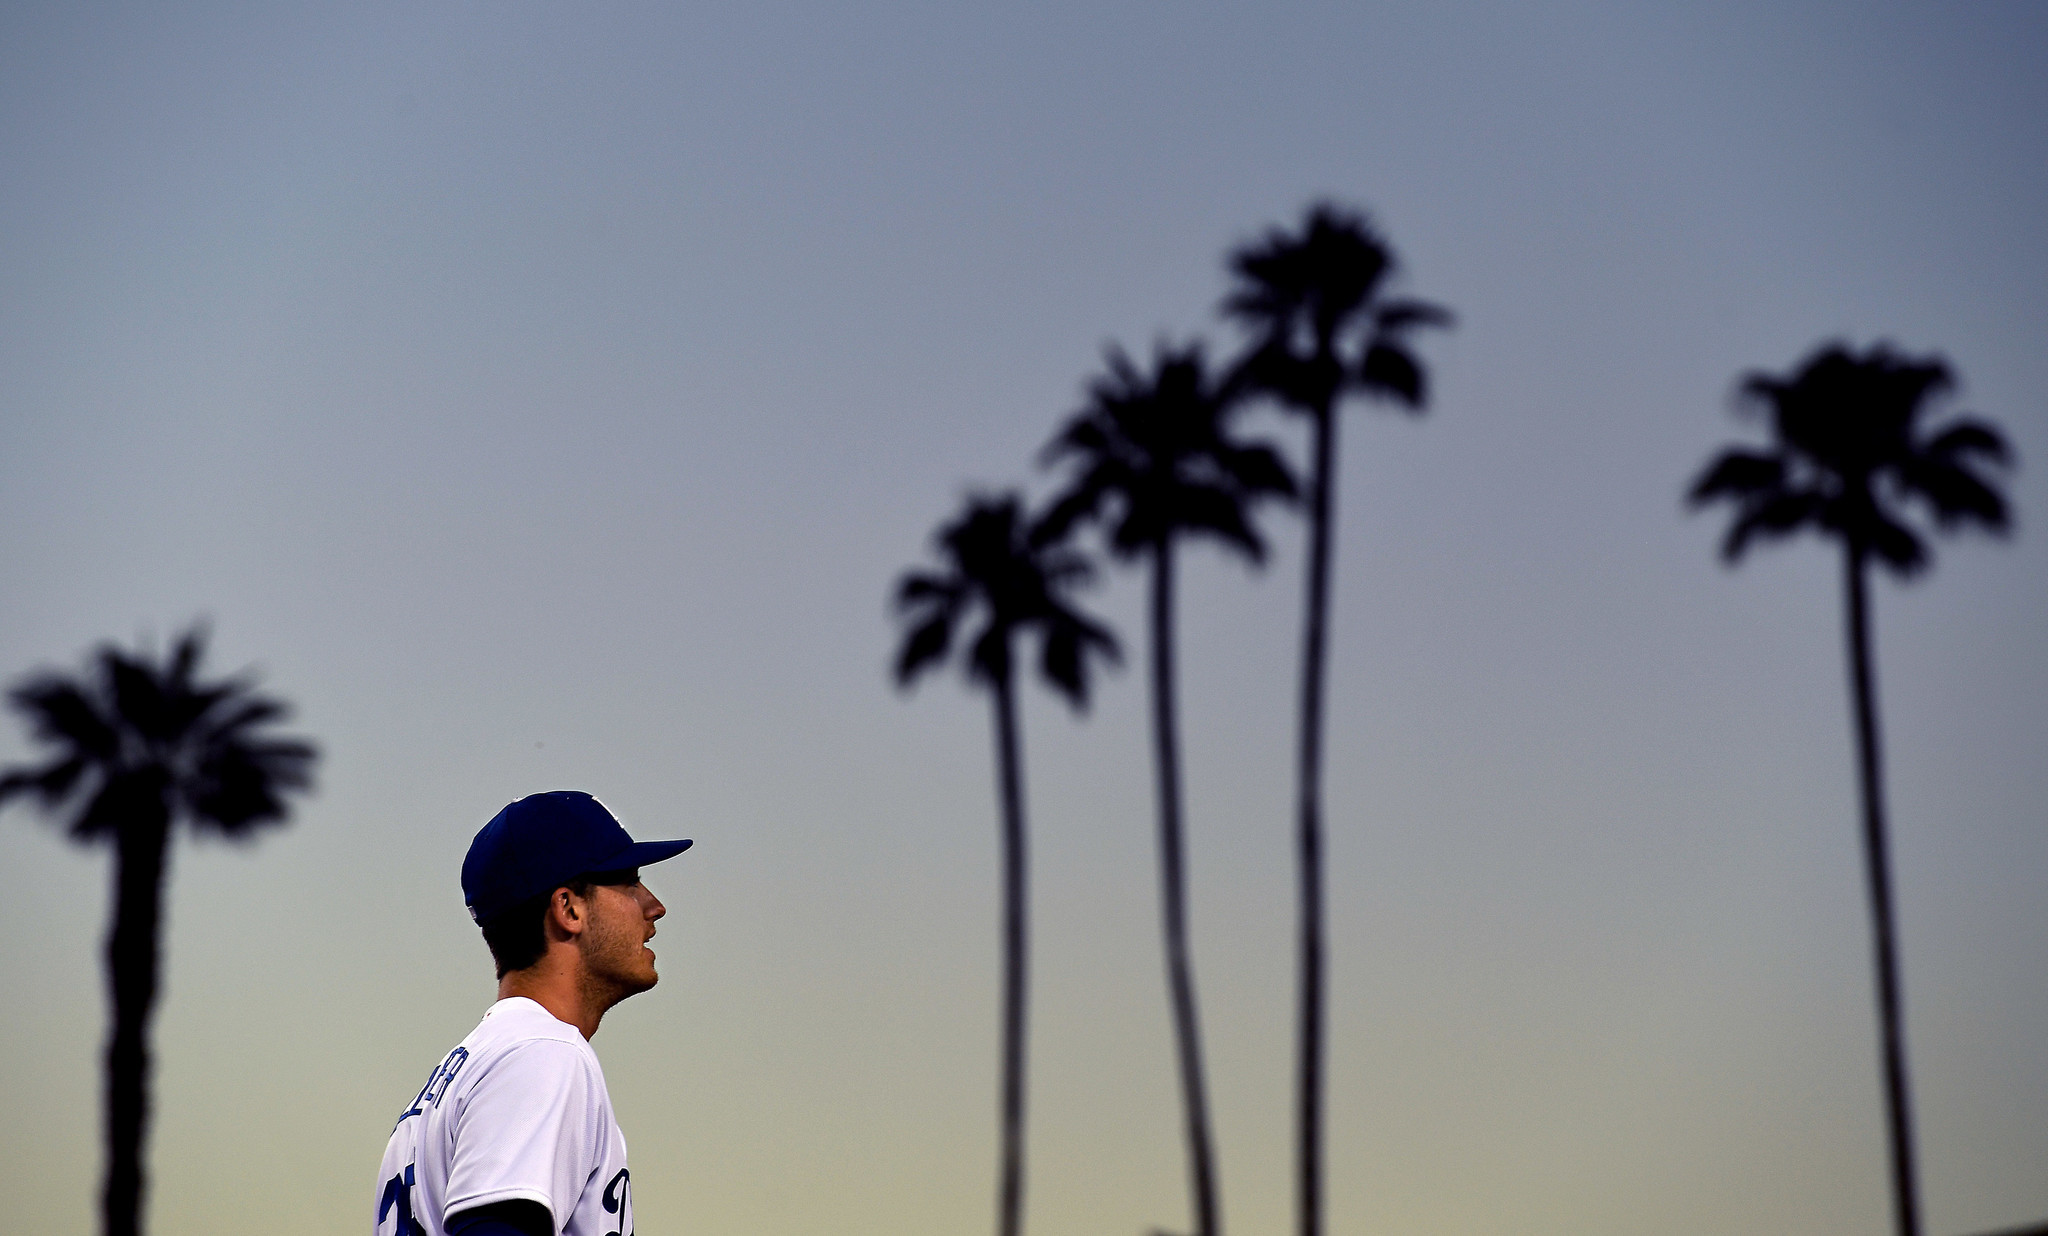 Dodgers rookie Cody Bellinger is flanked by palm trees during a game at Dodger Stadium.